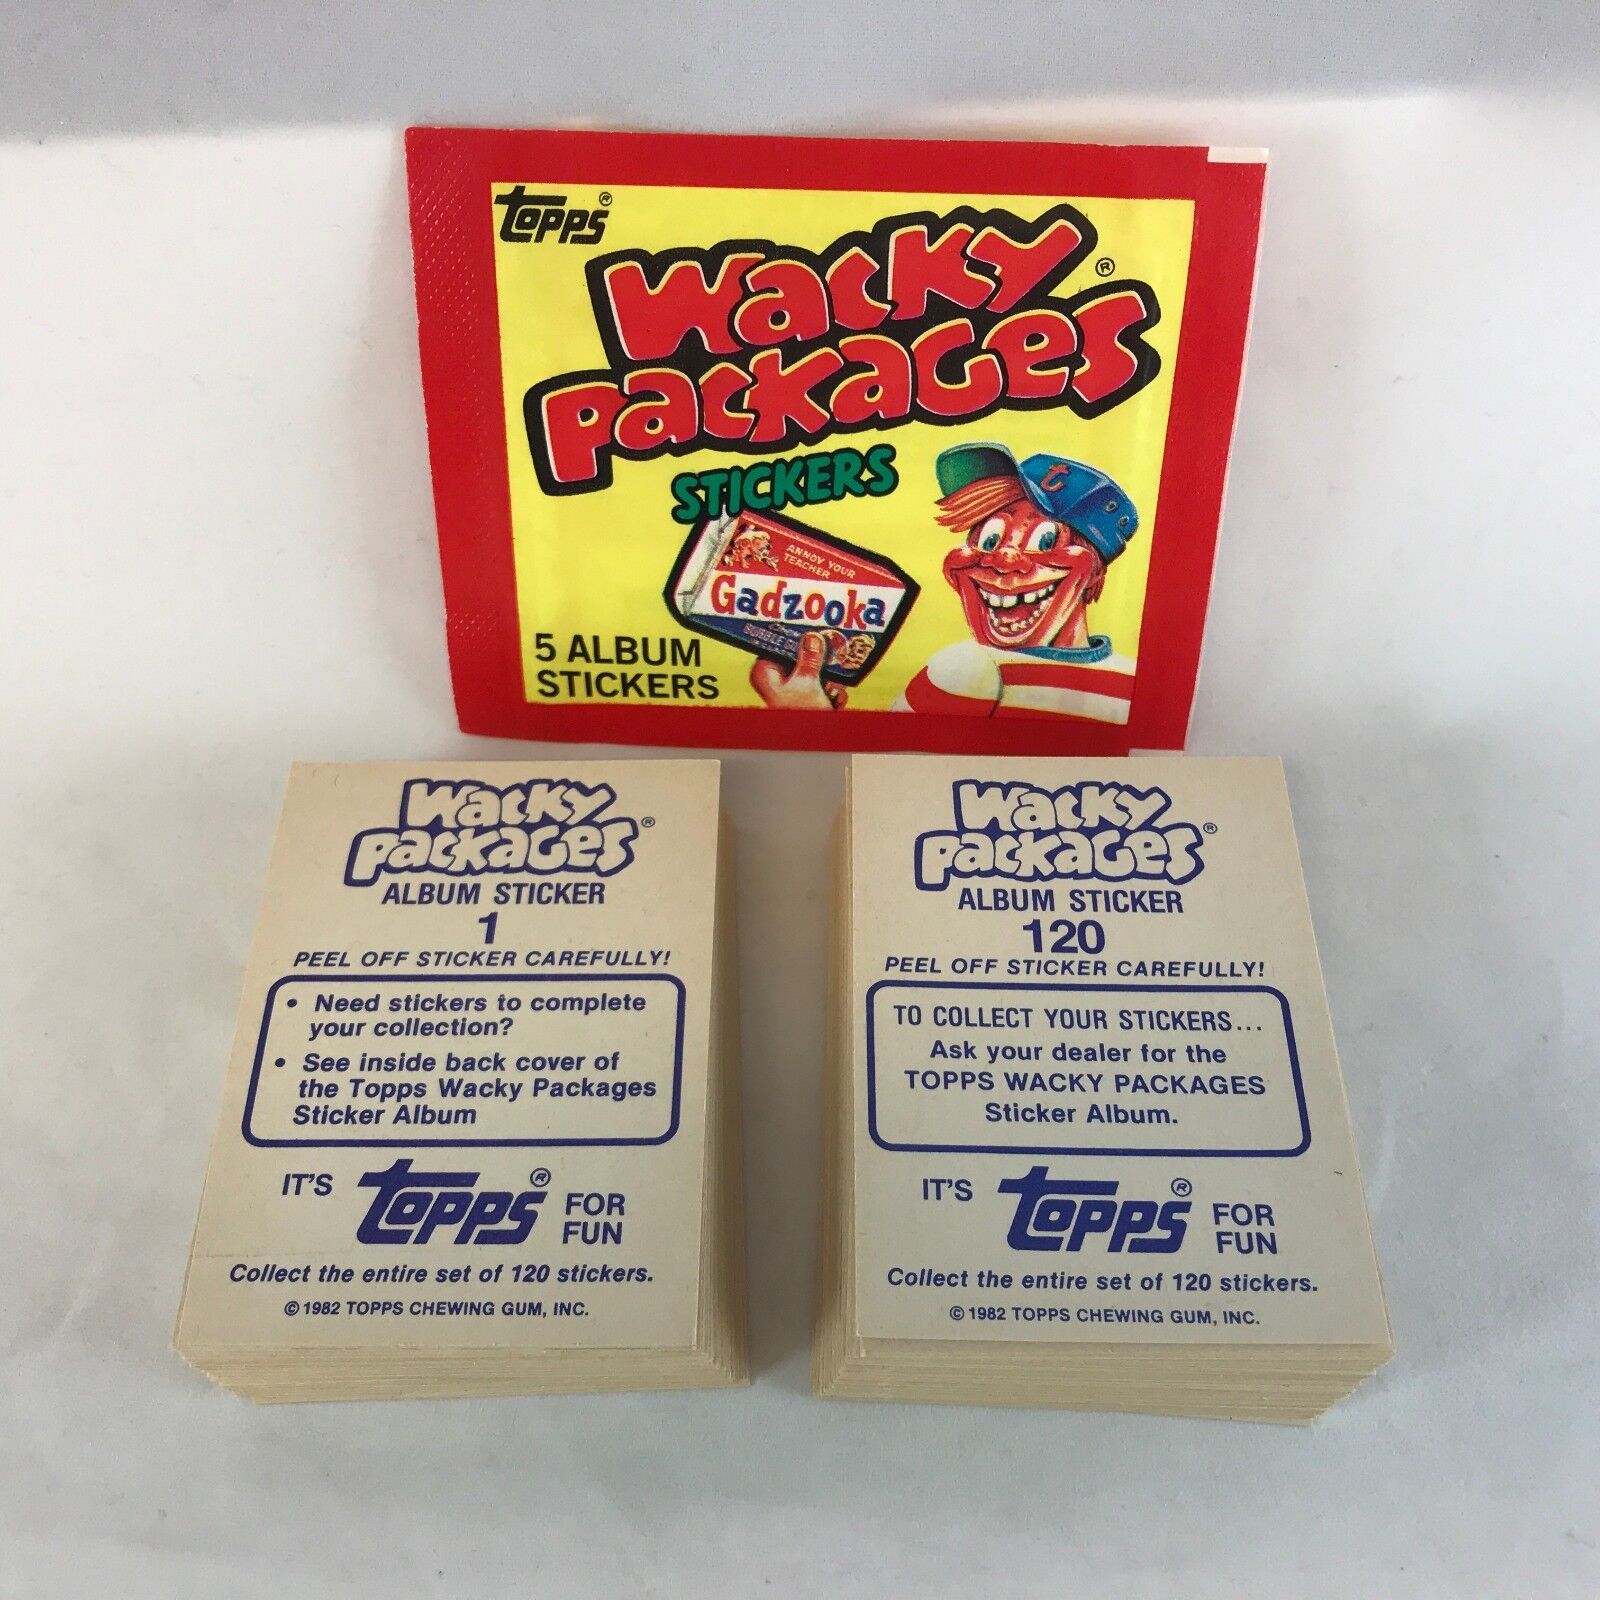 WACKY PACKAGES ALBUM STICKERS Topps 1982 COMPLETE STICKER SET OF 120 w/ WRAPPER